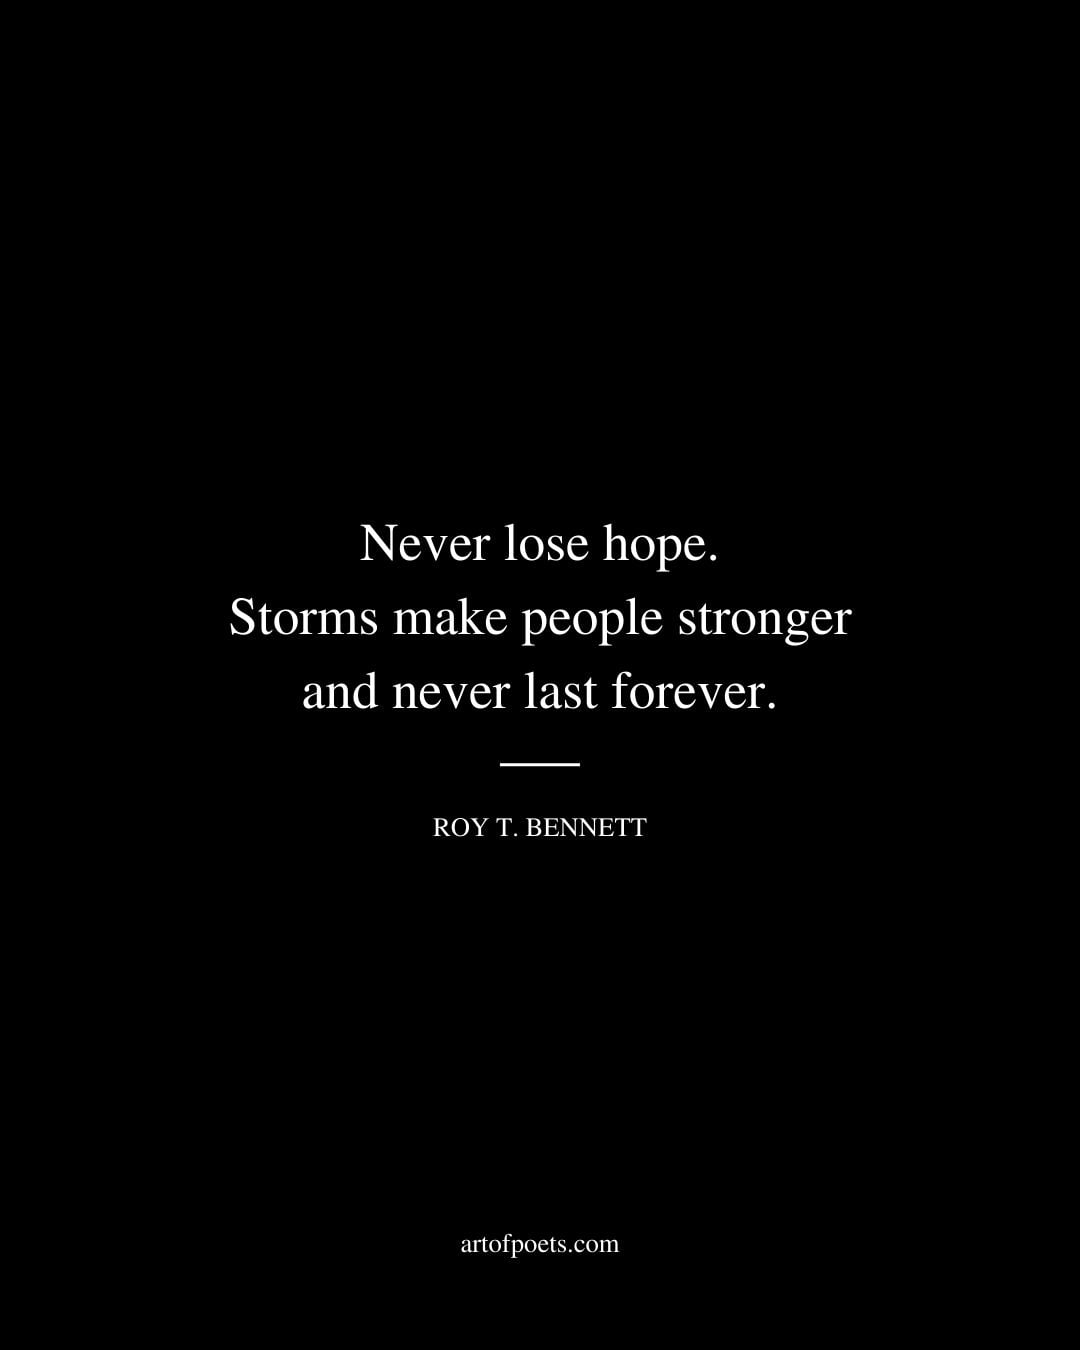 Never lose hope. Storms make people stronger and never last forever. Roy T. Bennett